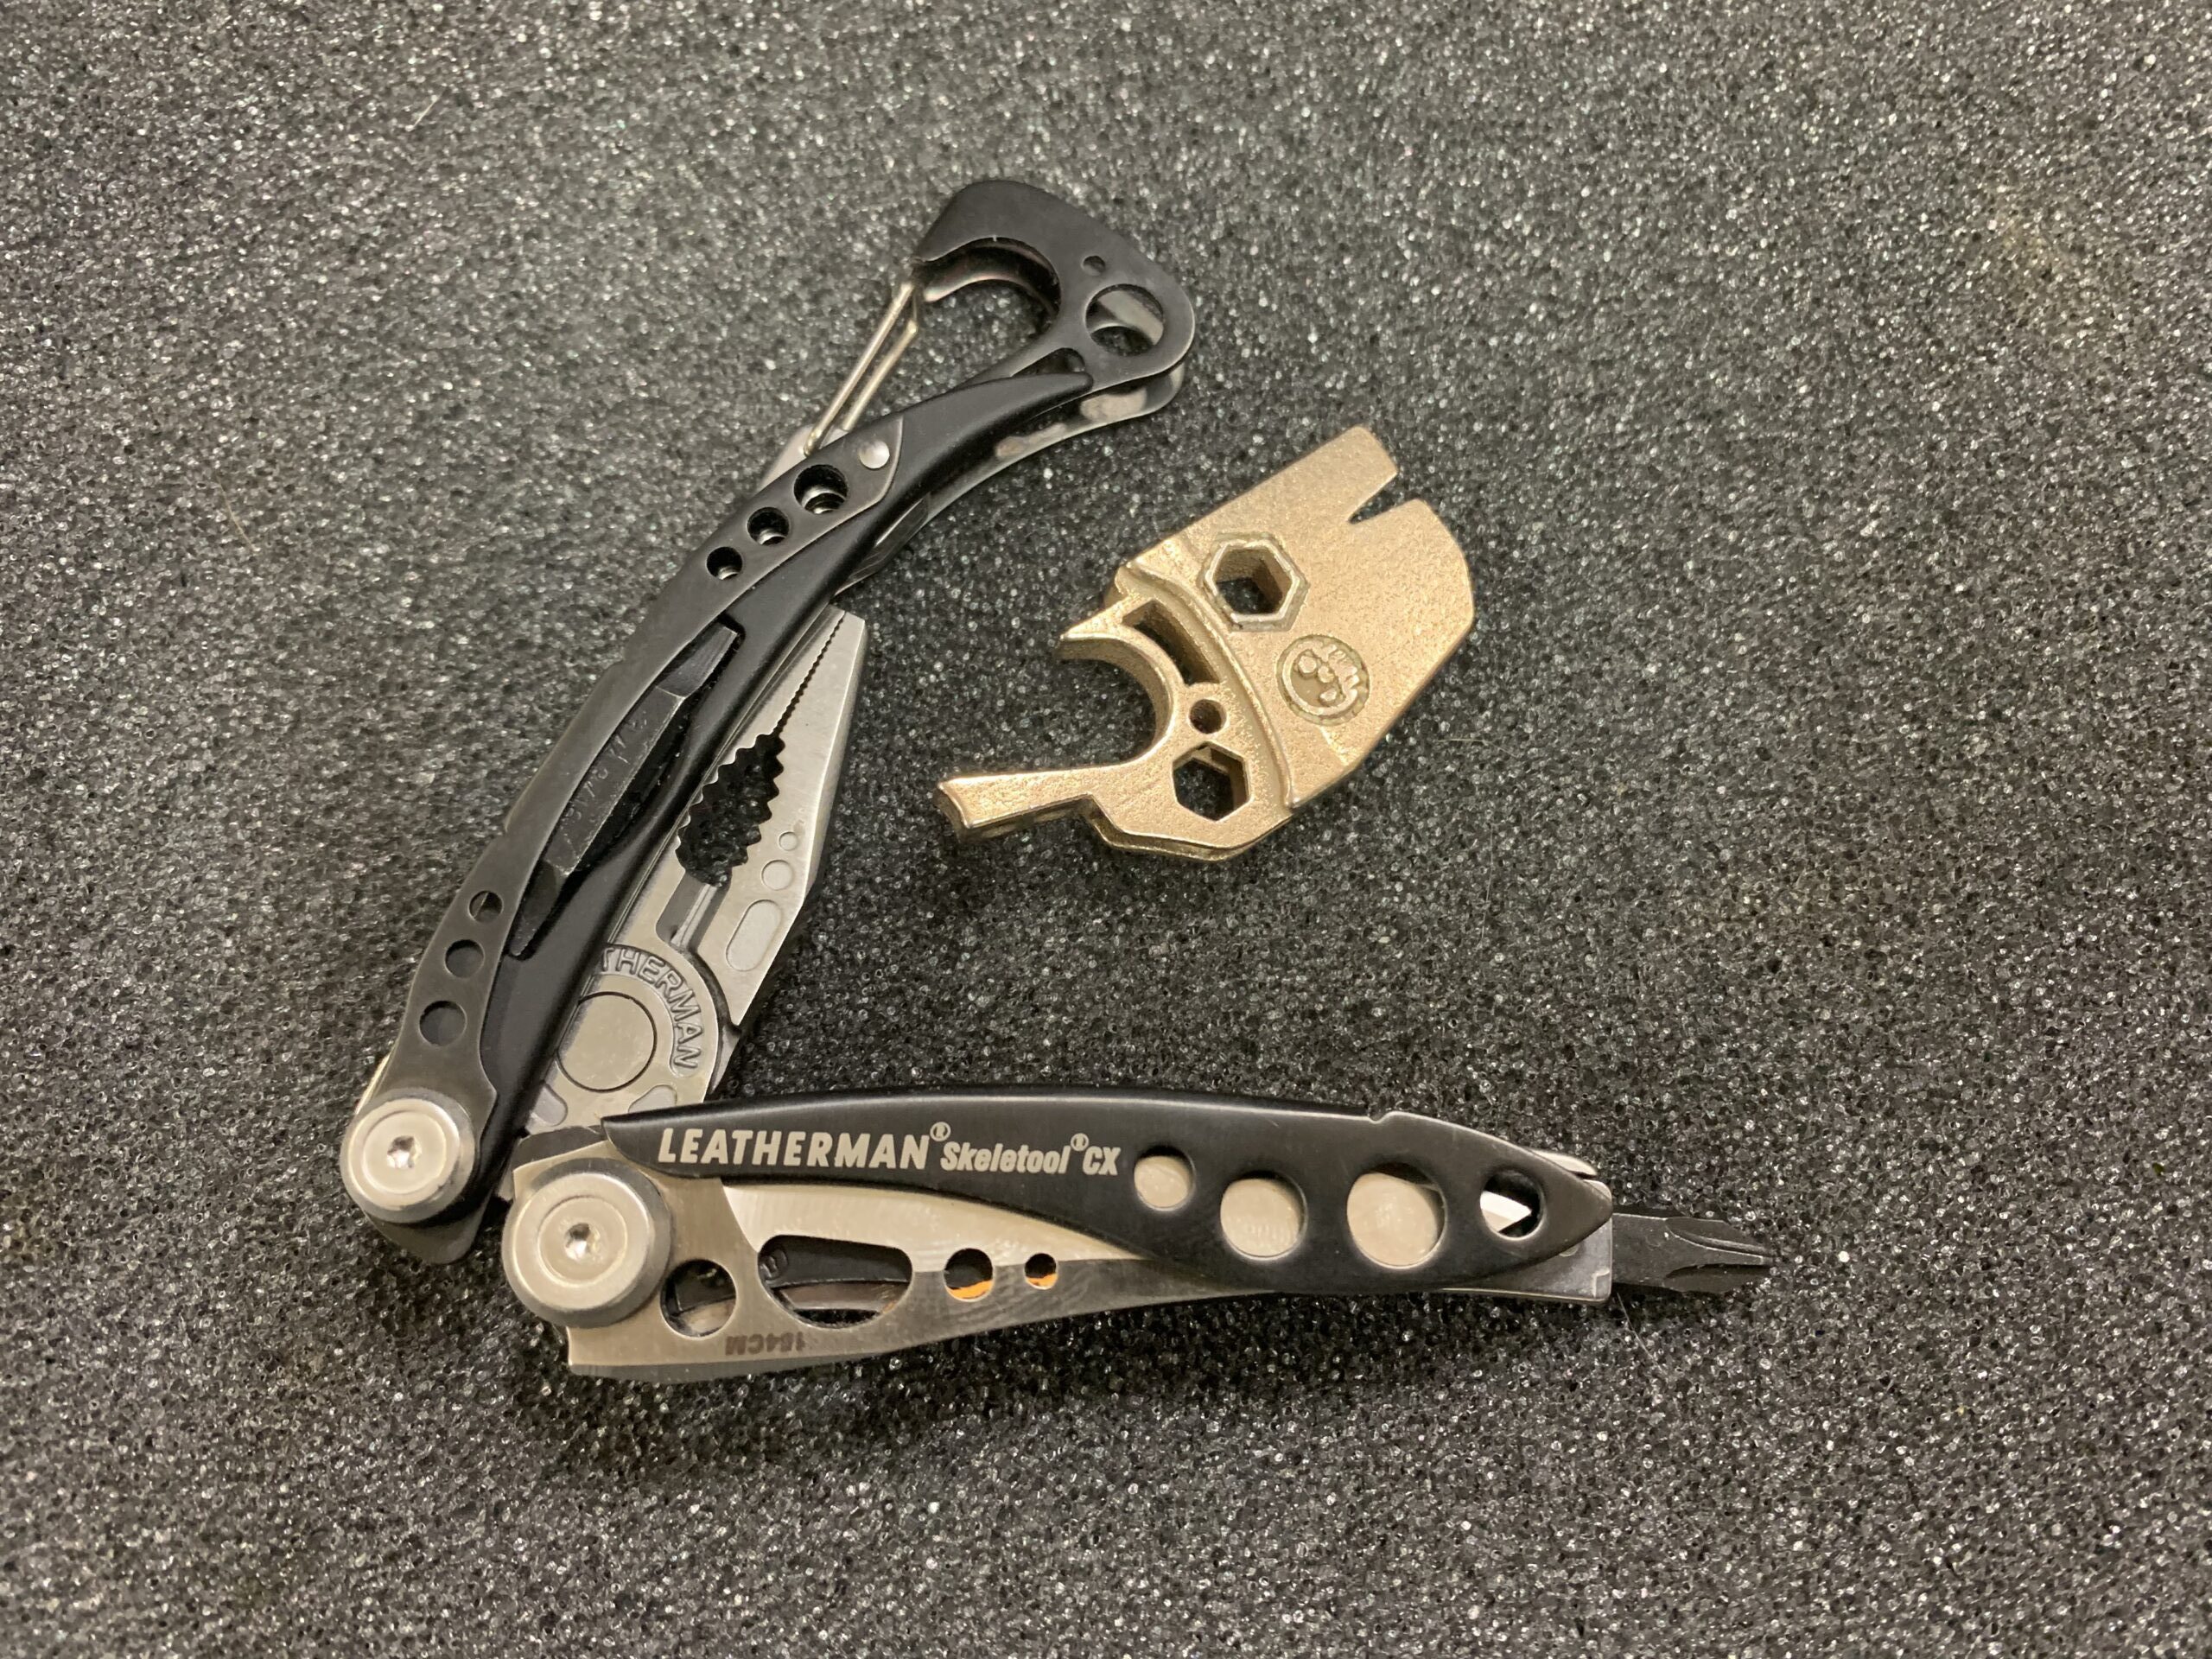 These 3D-printed accessories make the Skeletool even more useful